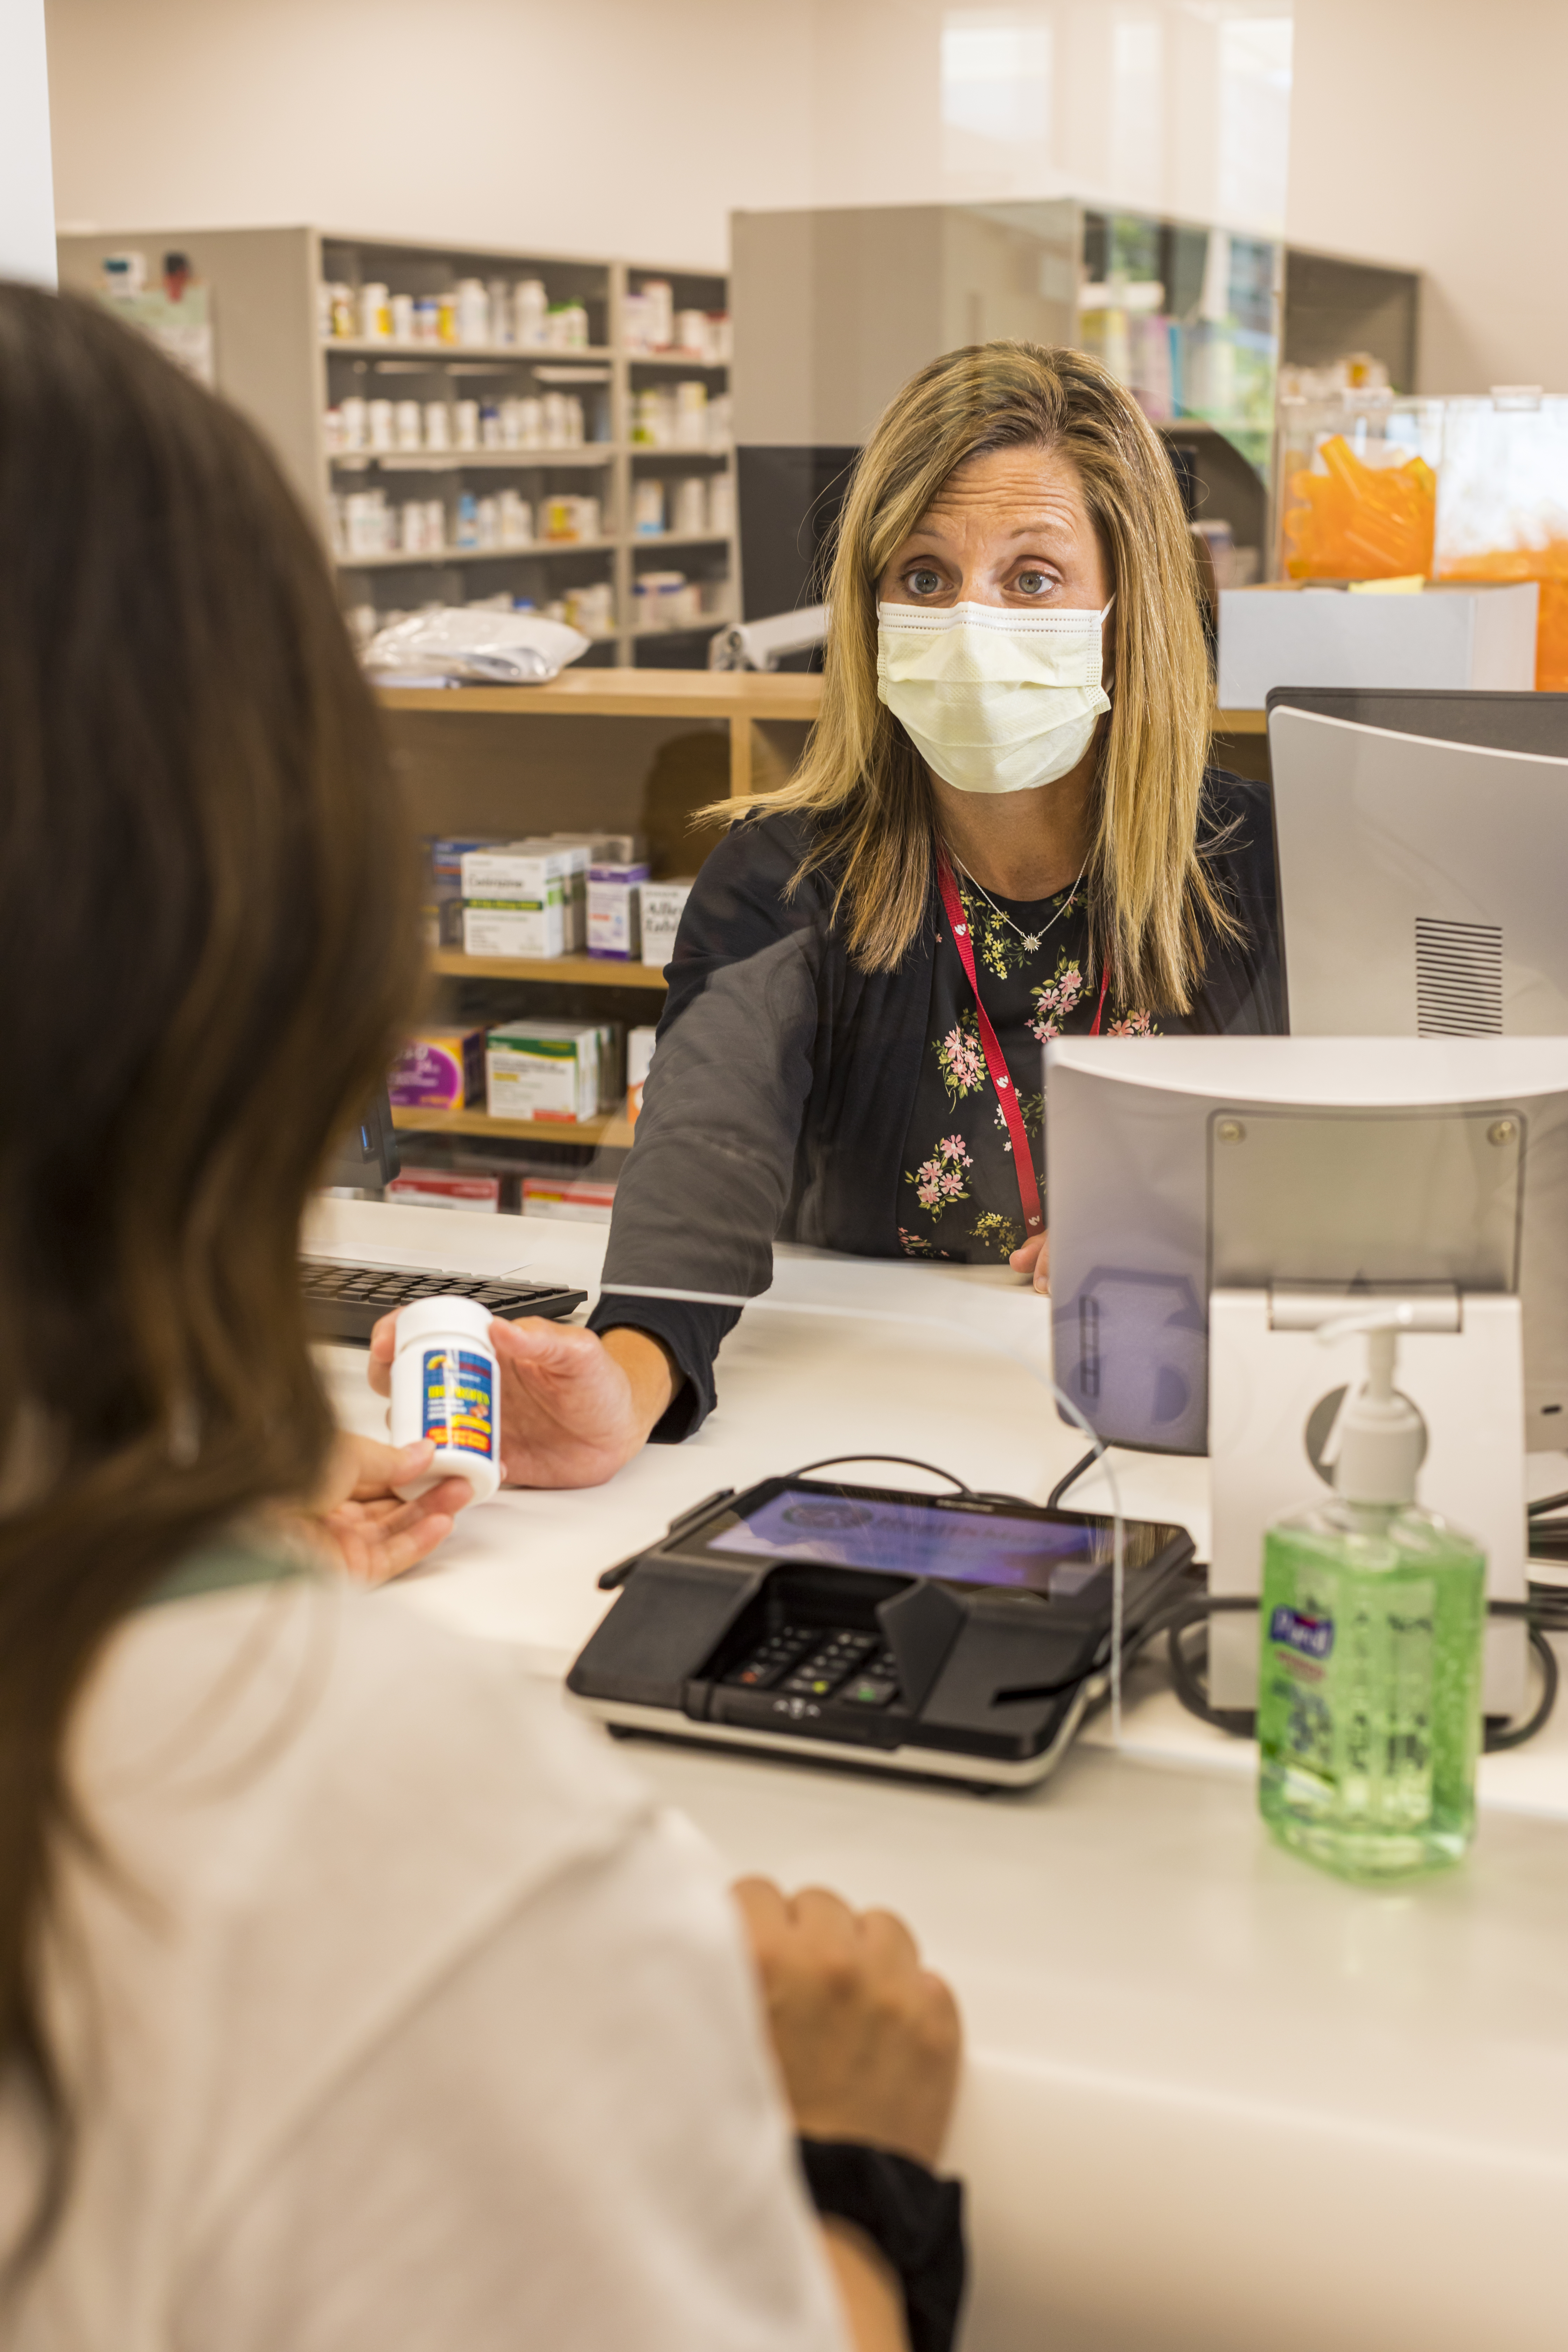 Student purchases an over-the-counter product from a pharmacy team member.